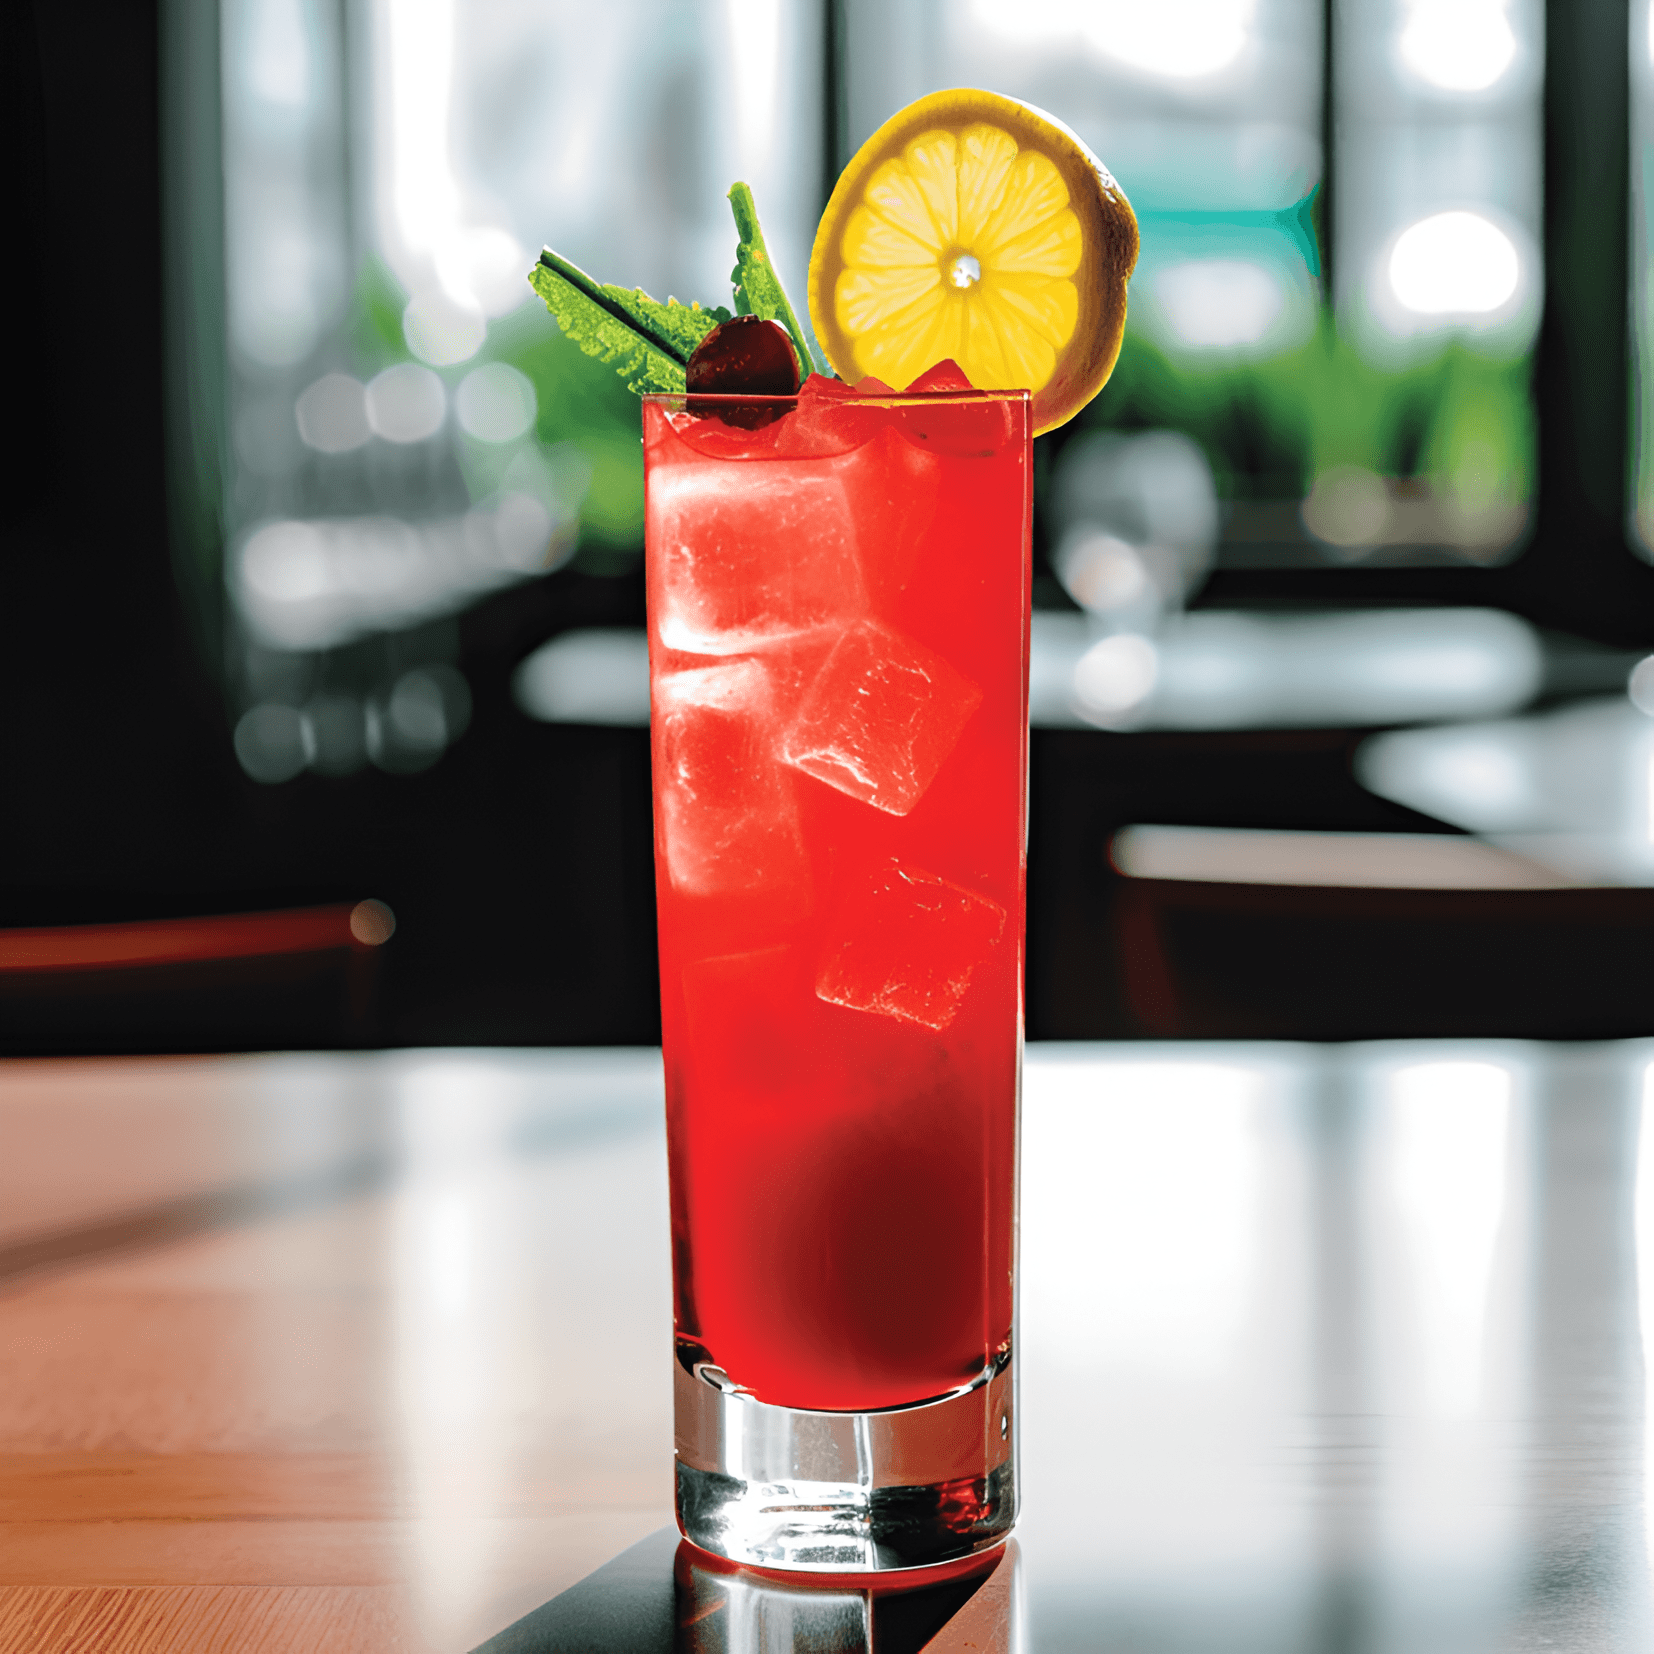 Red Snapper Cocktail Recipe - The Red Snapper is a savory, tangy, and slightly spicy cocktail. It has a rich tomato flavor, balanced by the sharpness of the lemon juice and the heat of the hot sauce. The Worcestershire sauce adds a touch of umami, while the gin provides a subtle herbal note.